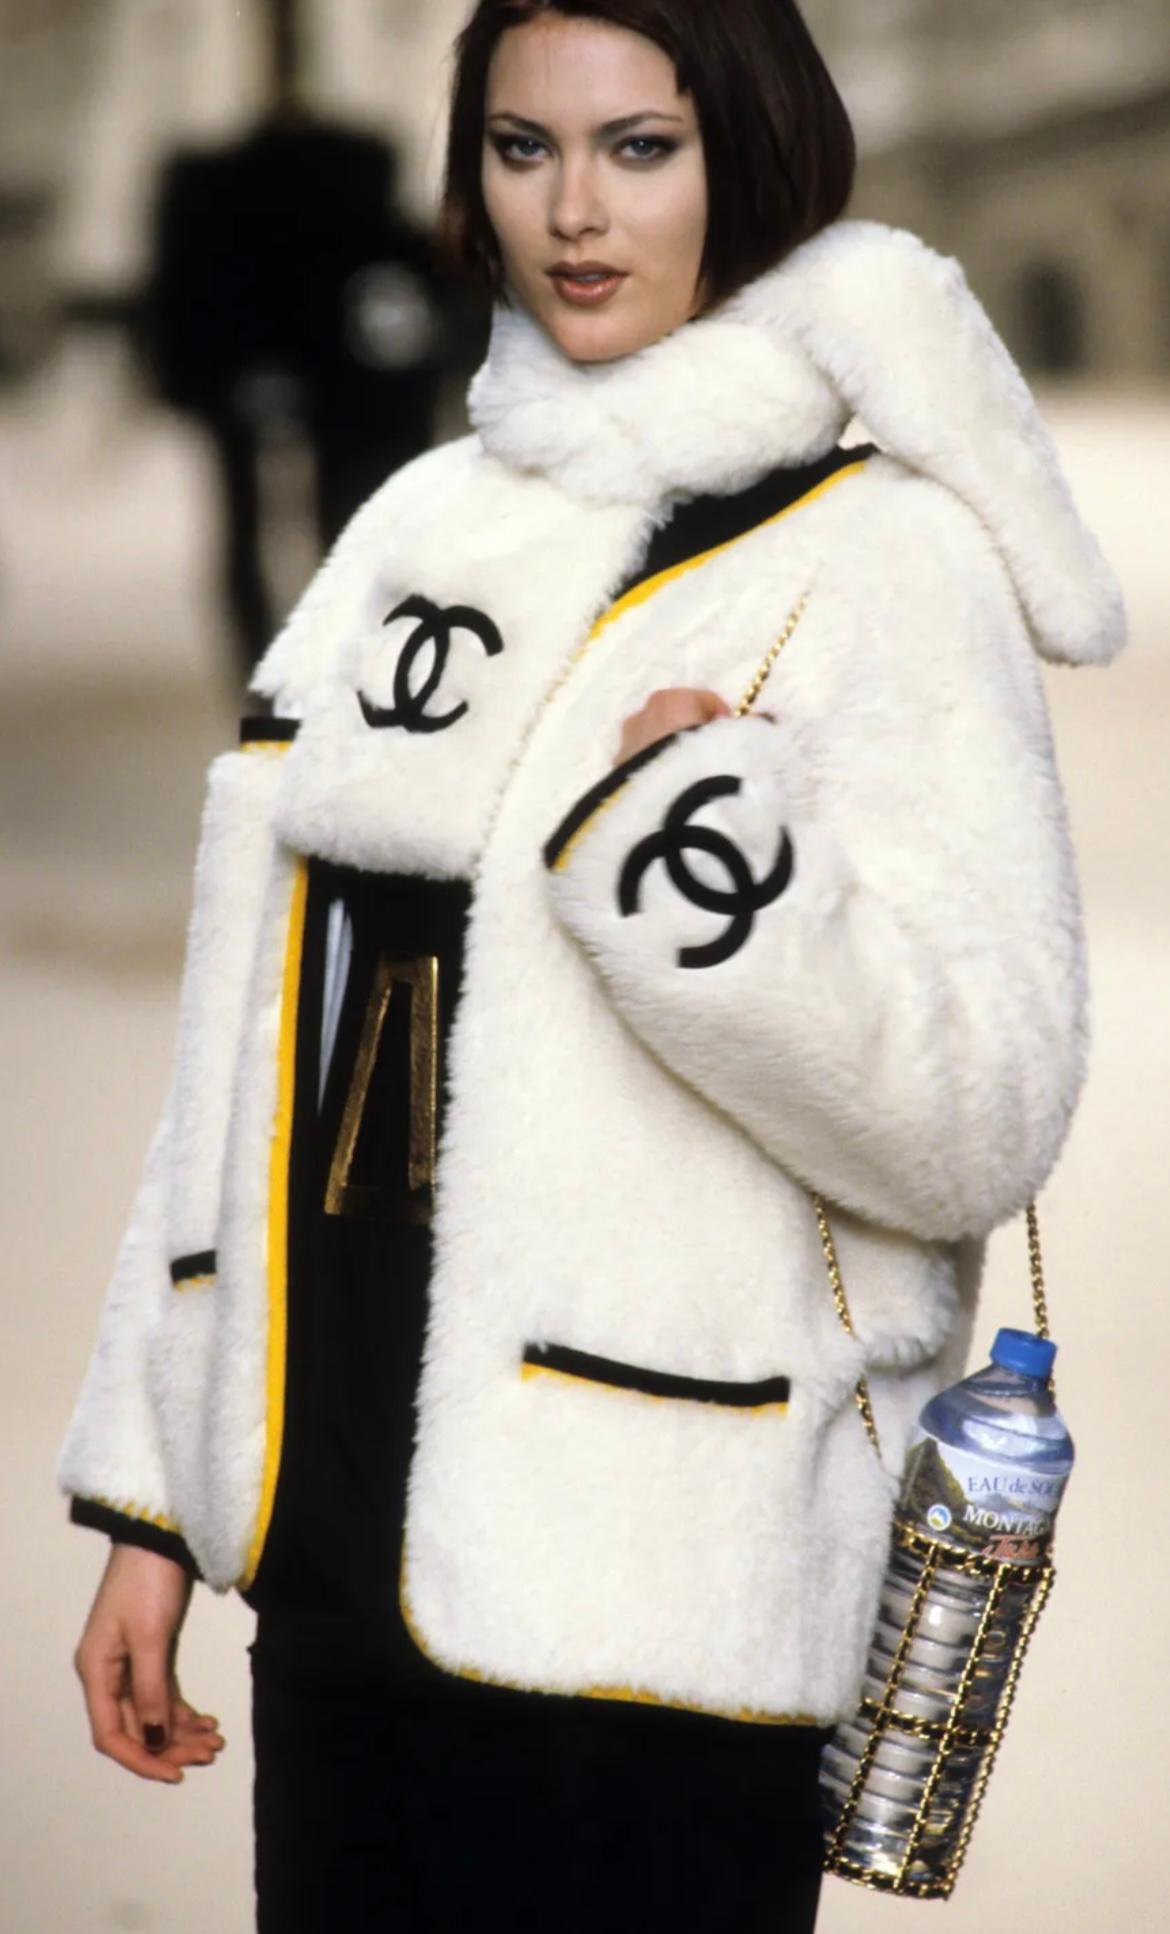 An extremely rare Chanel water bottle holder from the Fall 1994 collection. Must have for a real collector!  This exceptional piece made of gold-plated brass and leather was featured by Claudia Schiffer, Brandi Quinones, Rihanna and Amber in the